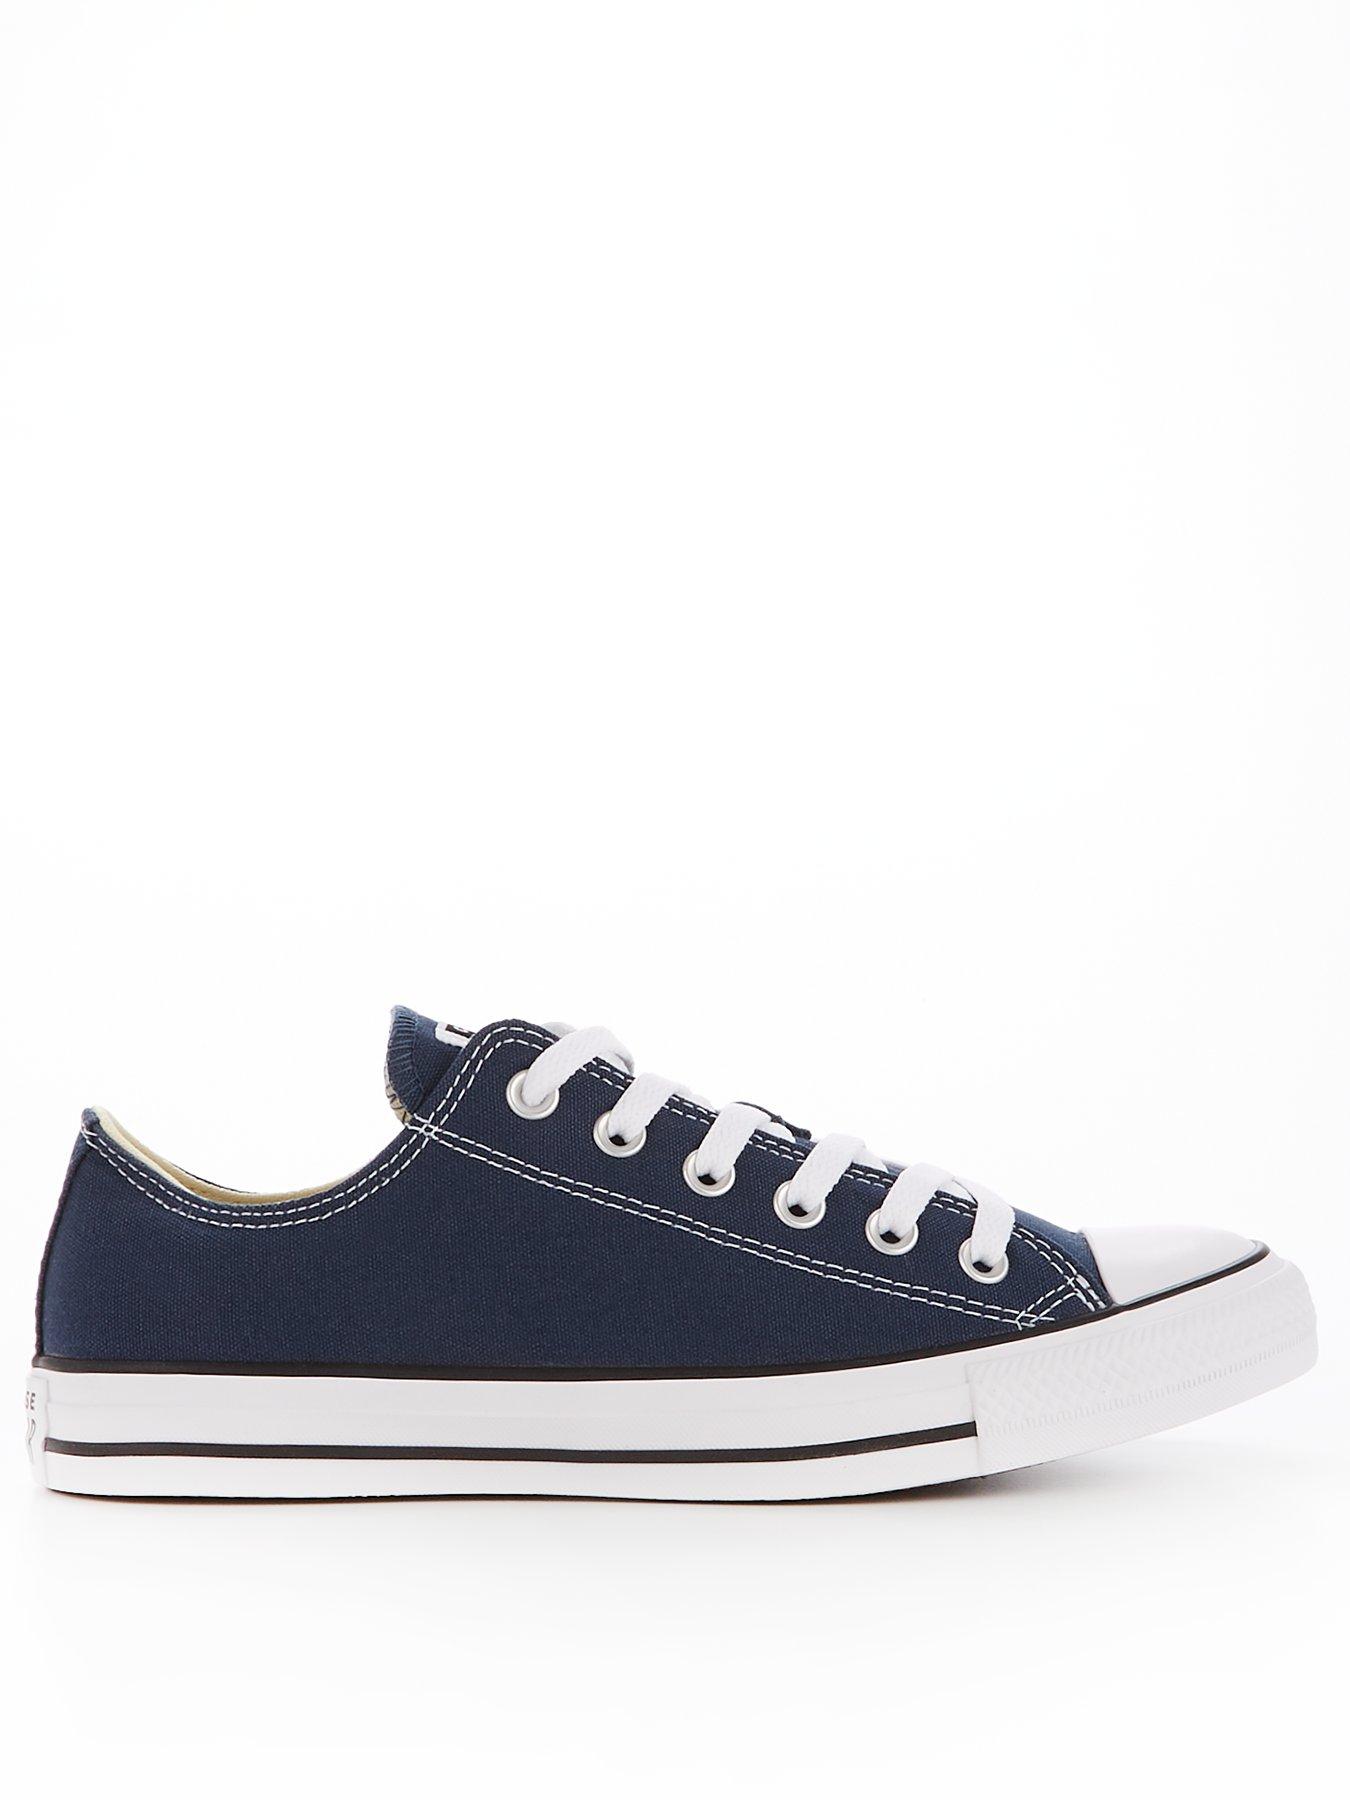 converse all star ox trainers navy